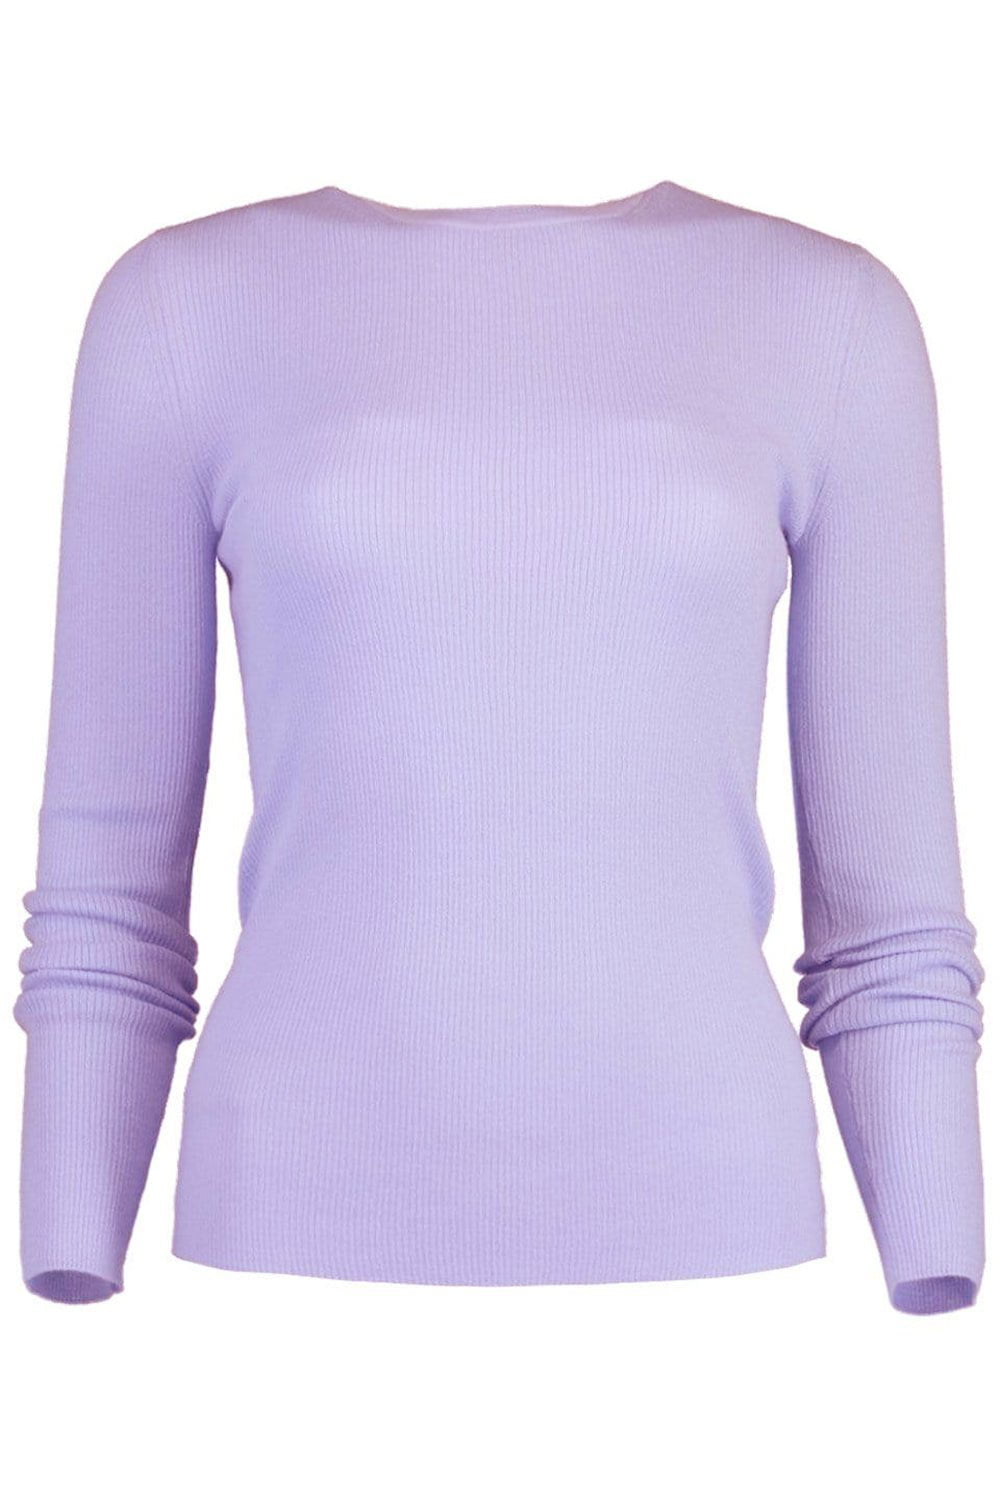 MICHAEL KORS COLLECTION-Hutton Pullover - Freesia-